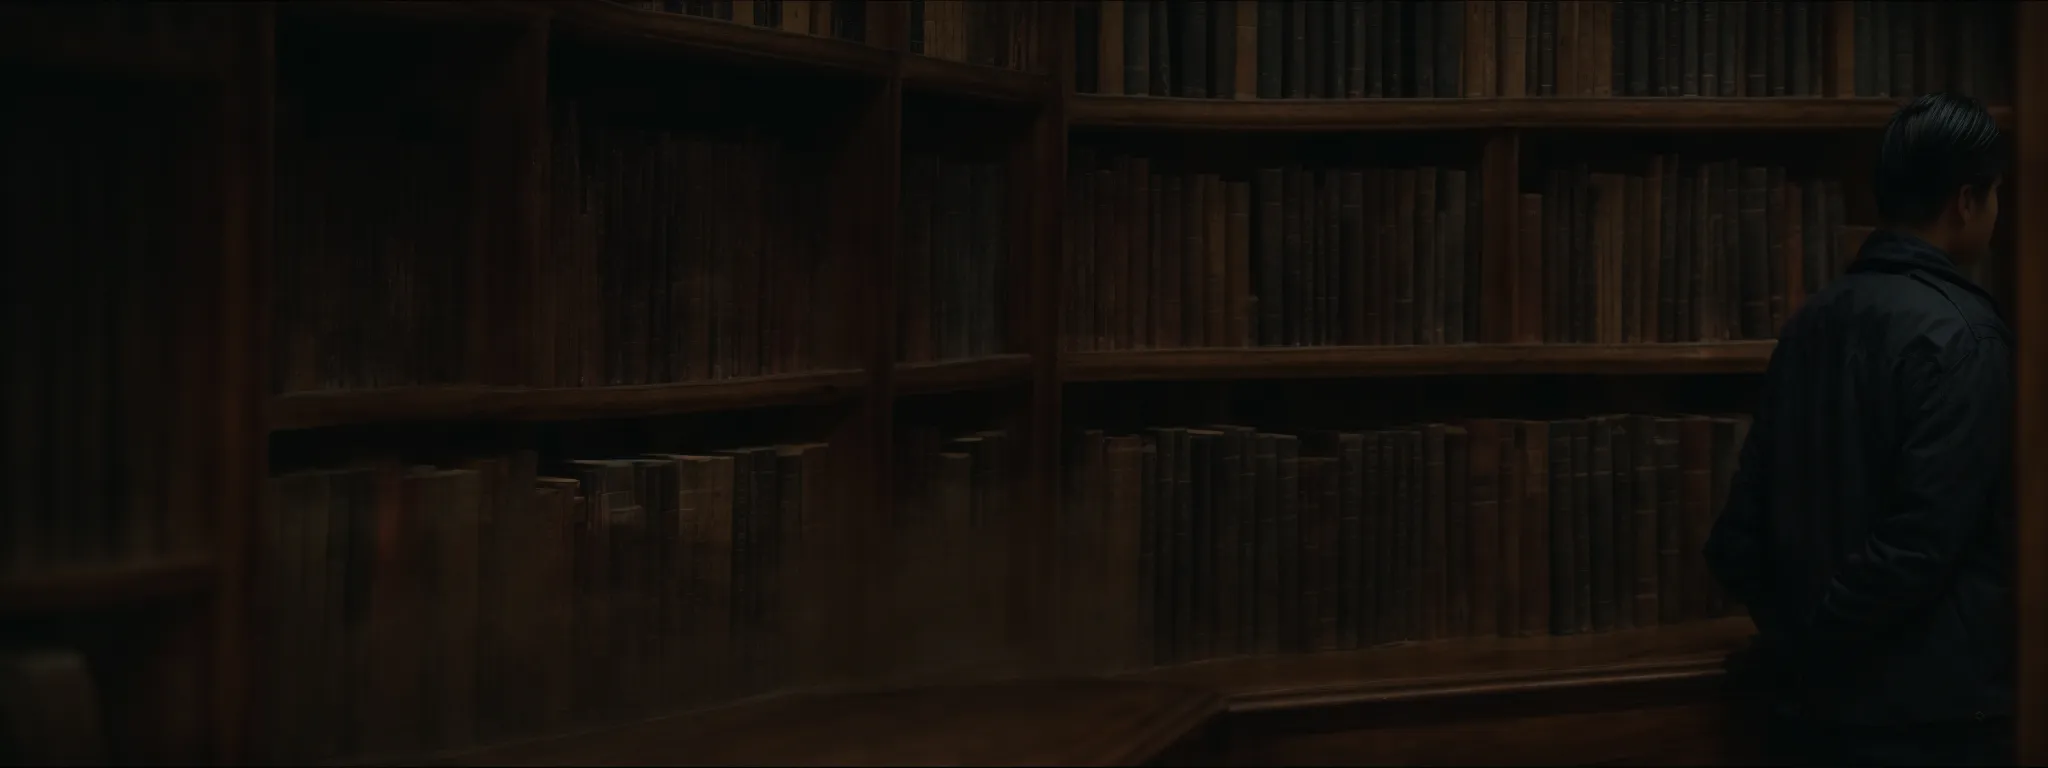 a person stands at the edge of a vast library filled with books, peering thoughtfully into an open tome.